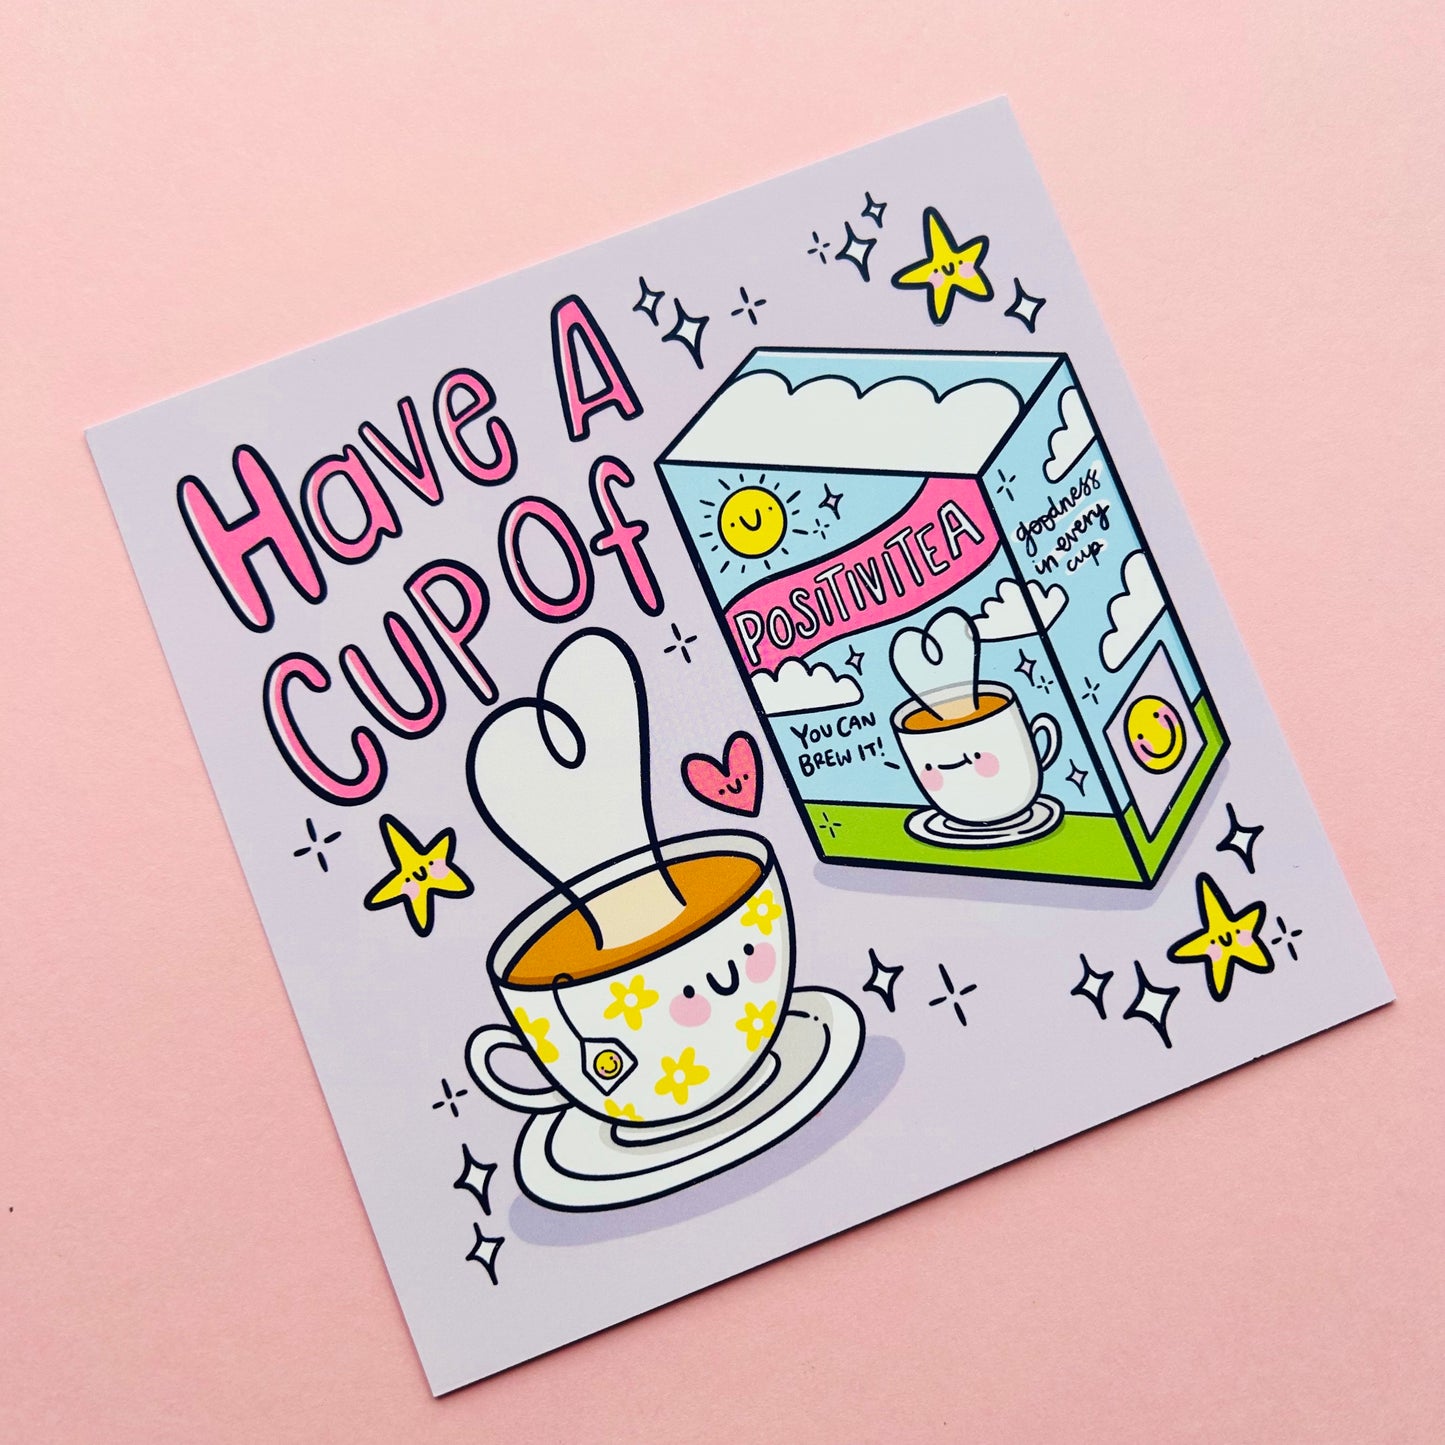 Have A Cup of Positivitea - Square Print